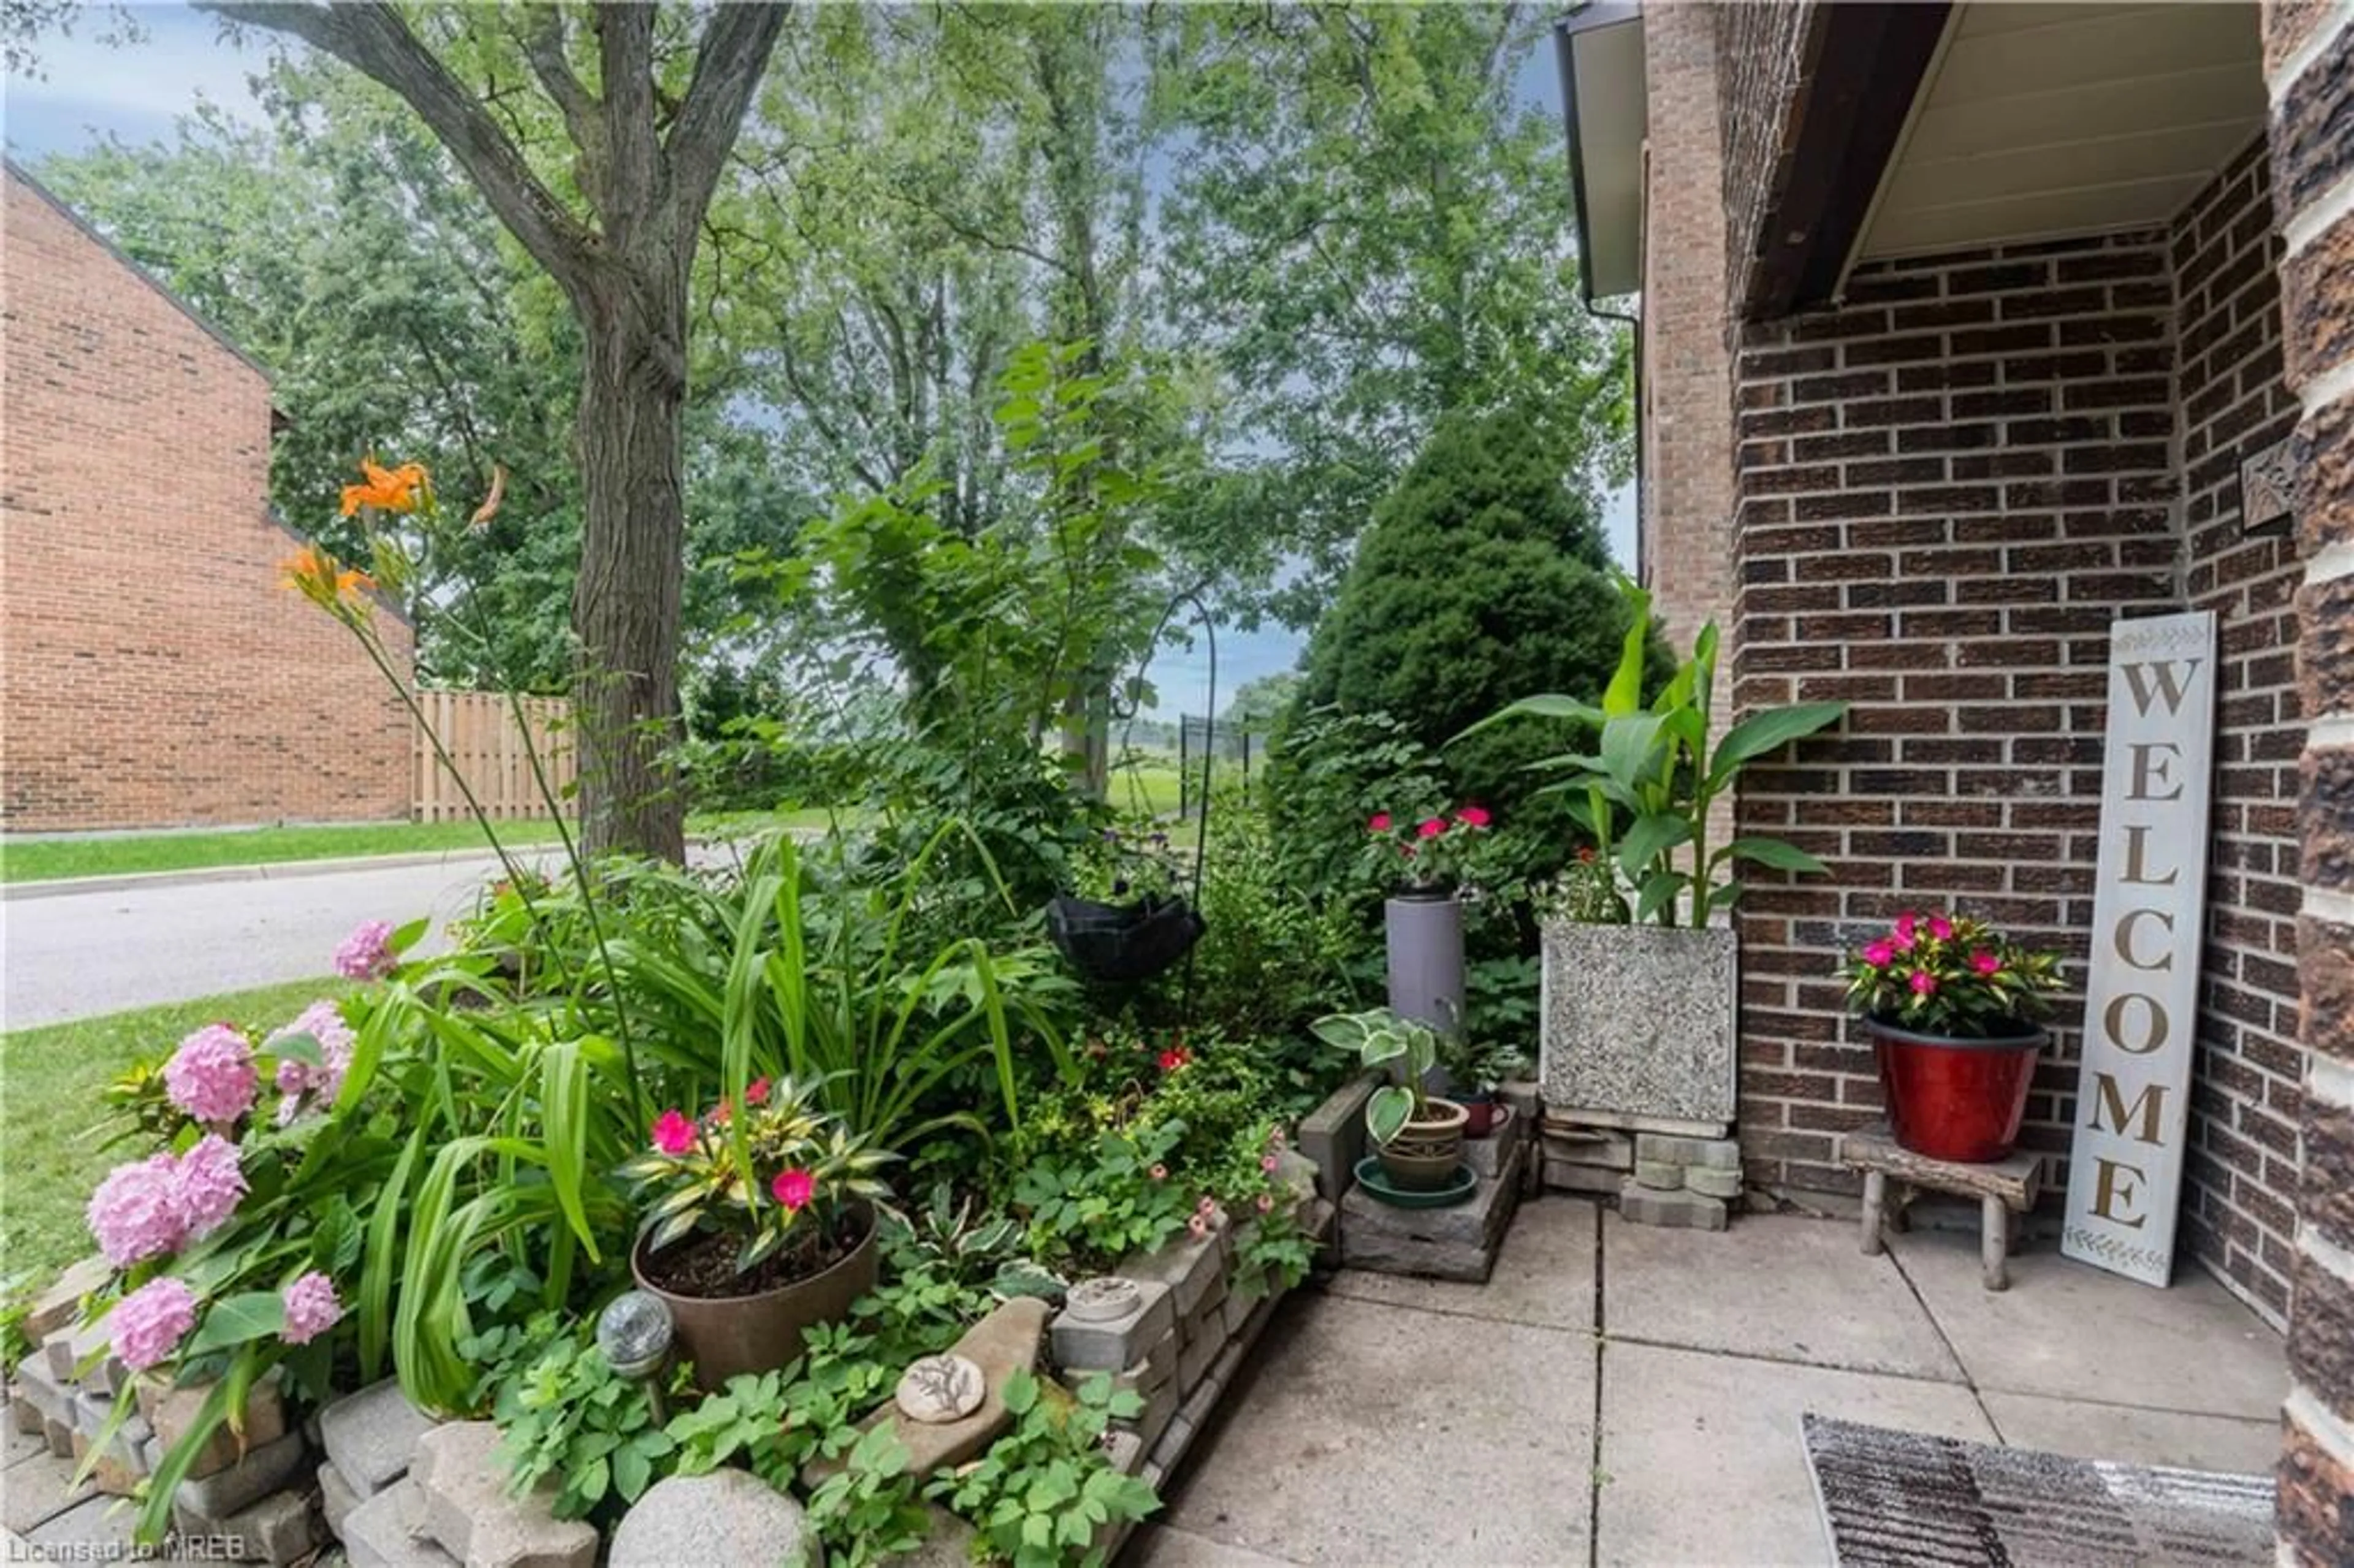 Patio for 2020 South Millway #27, Mississauga Ontario L5L 1K2